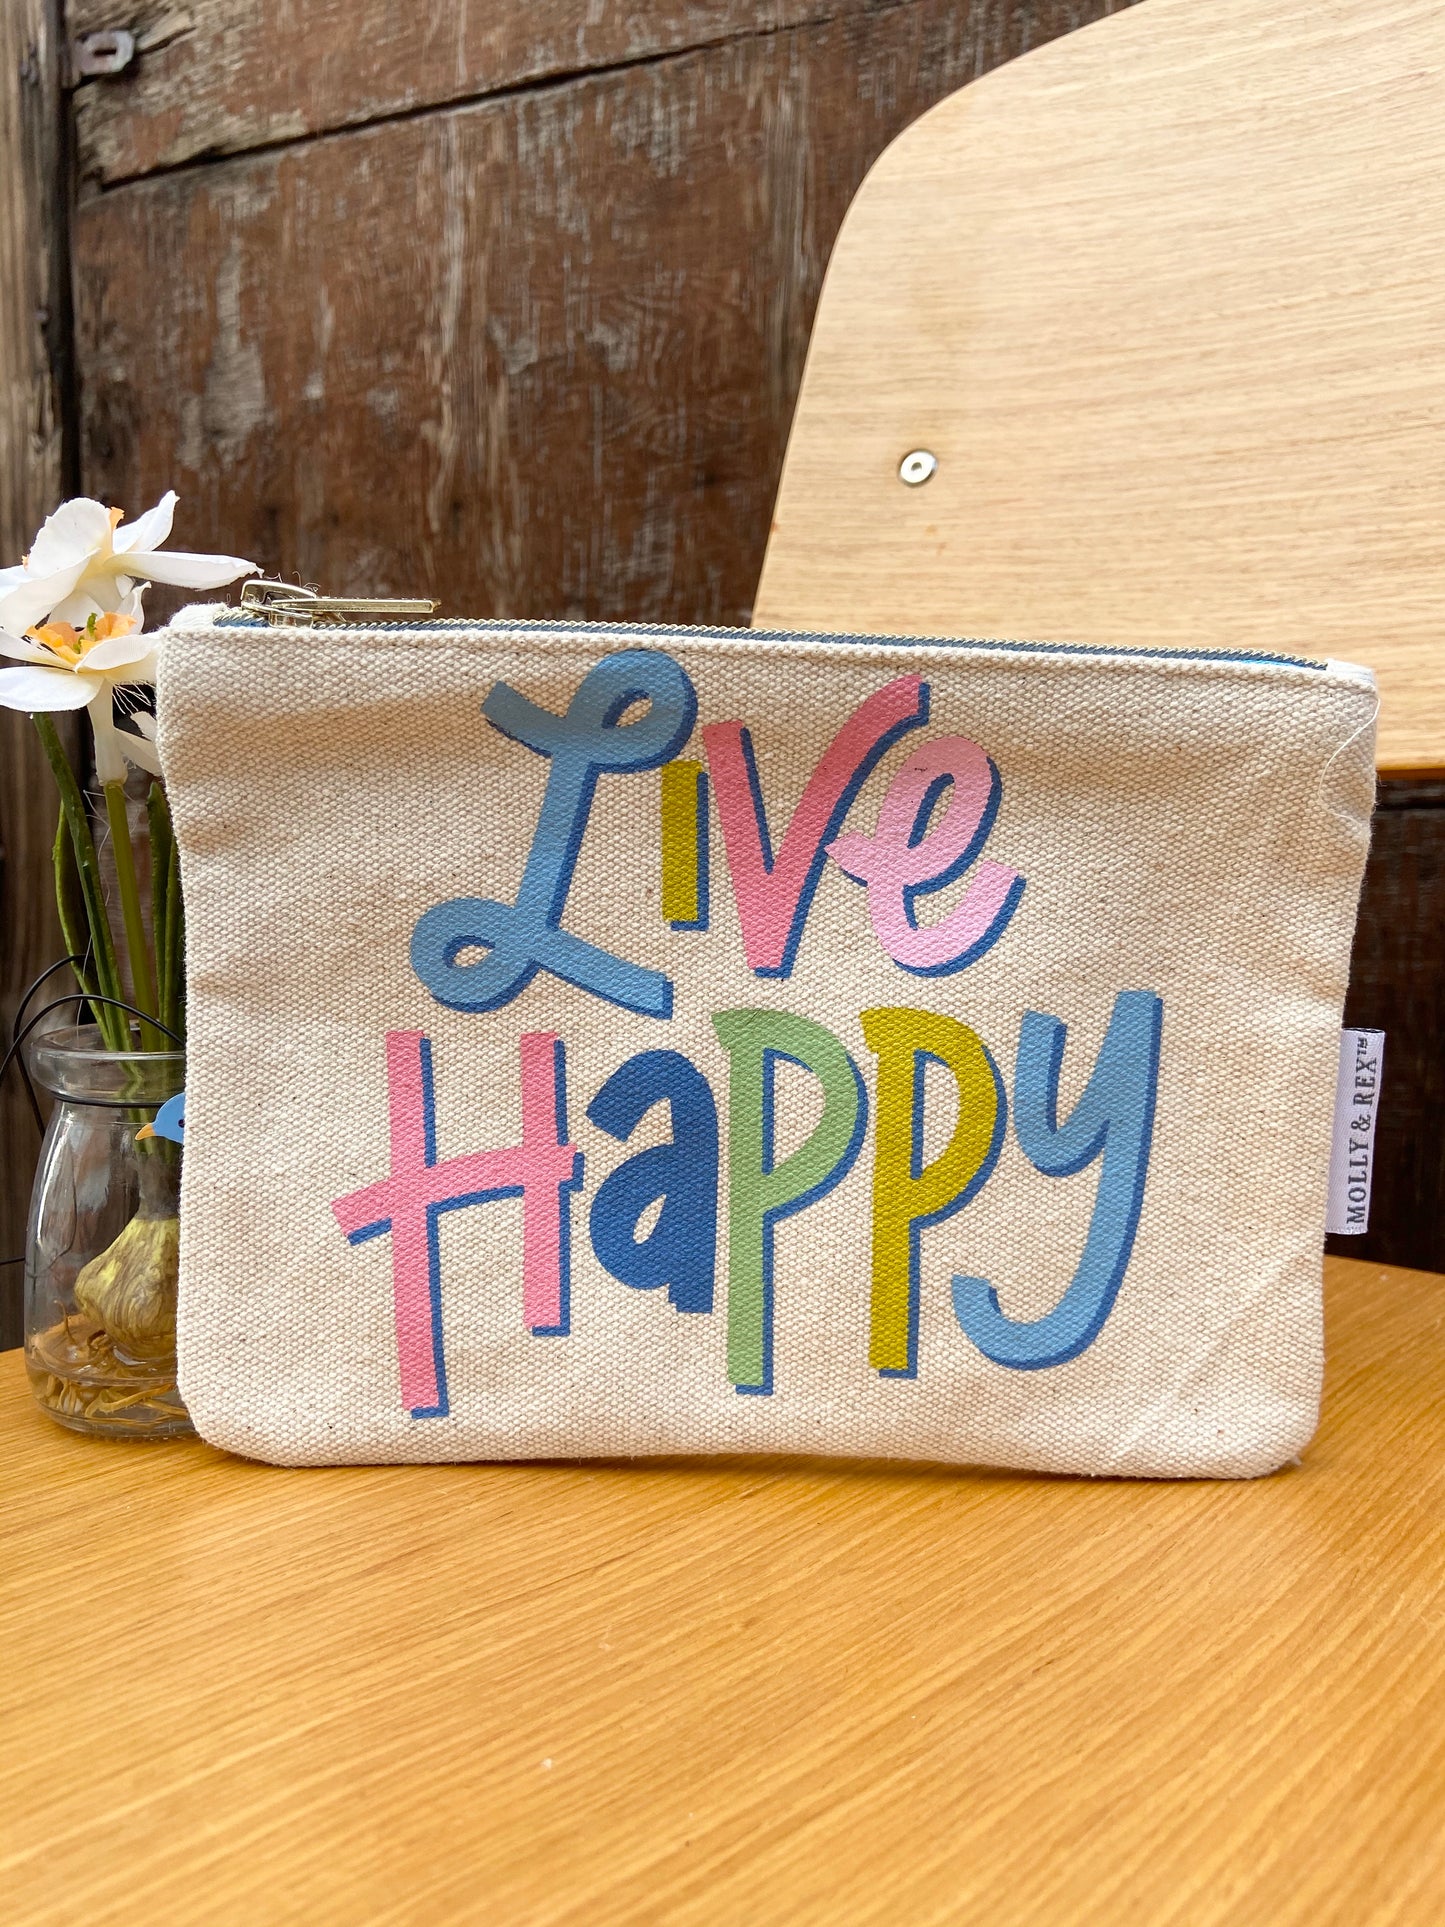 Brightly colored "Live Happy" canvas pouch by Molly & Rex. Measures 7 3/4" x 5 3/4".